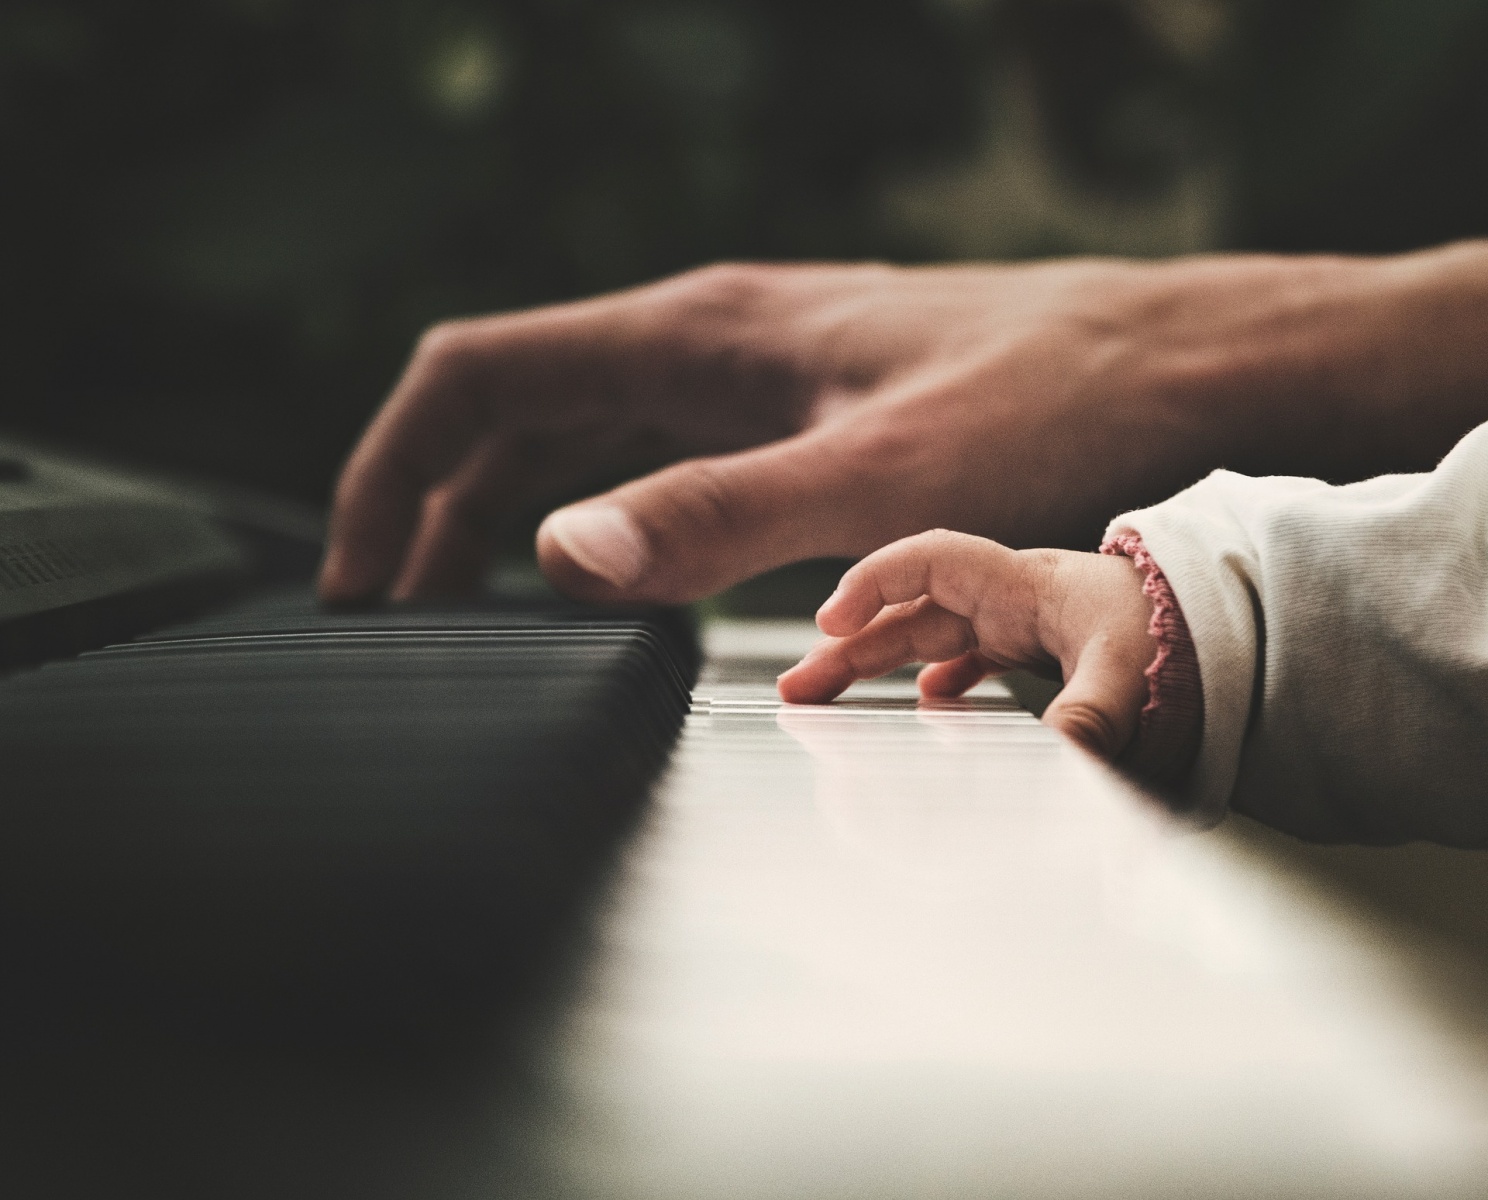 How Could Playing The Piano Be Good For Your Health?